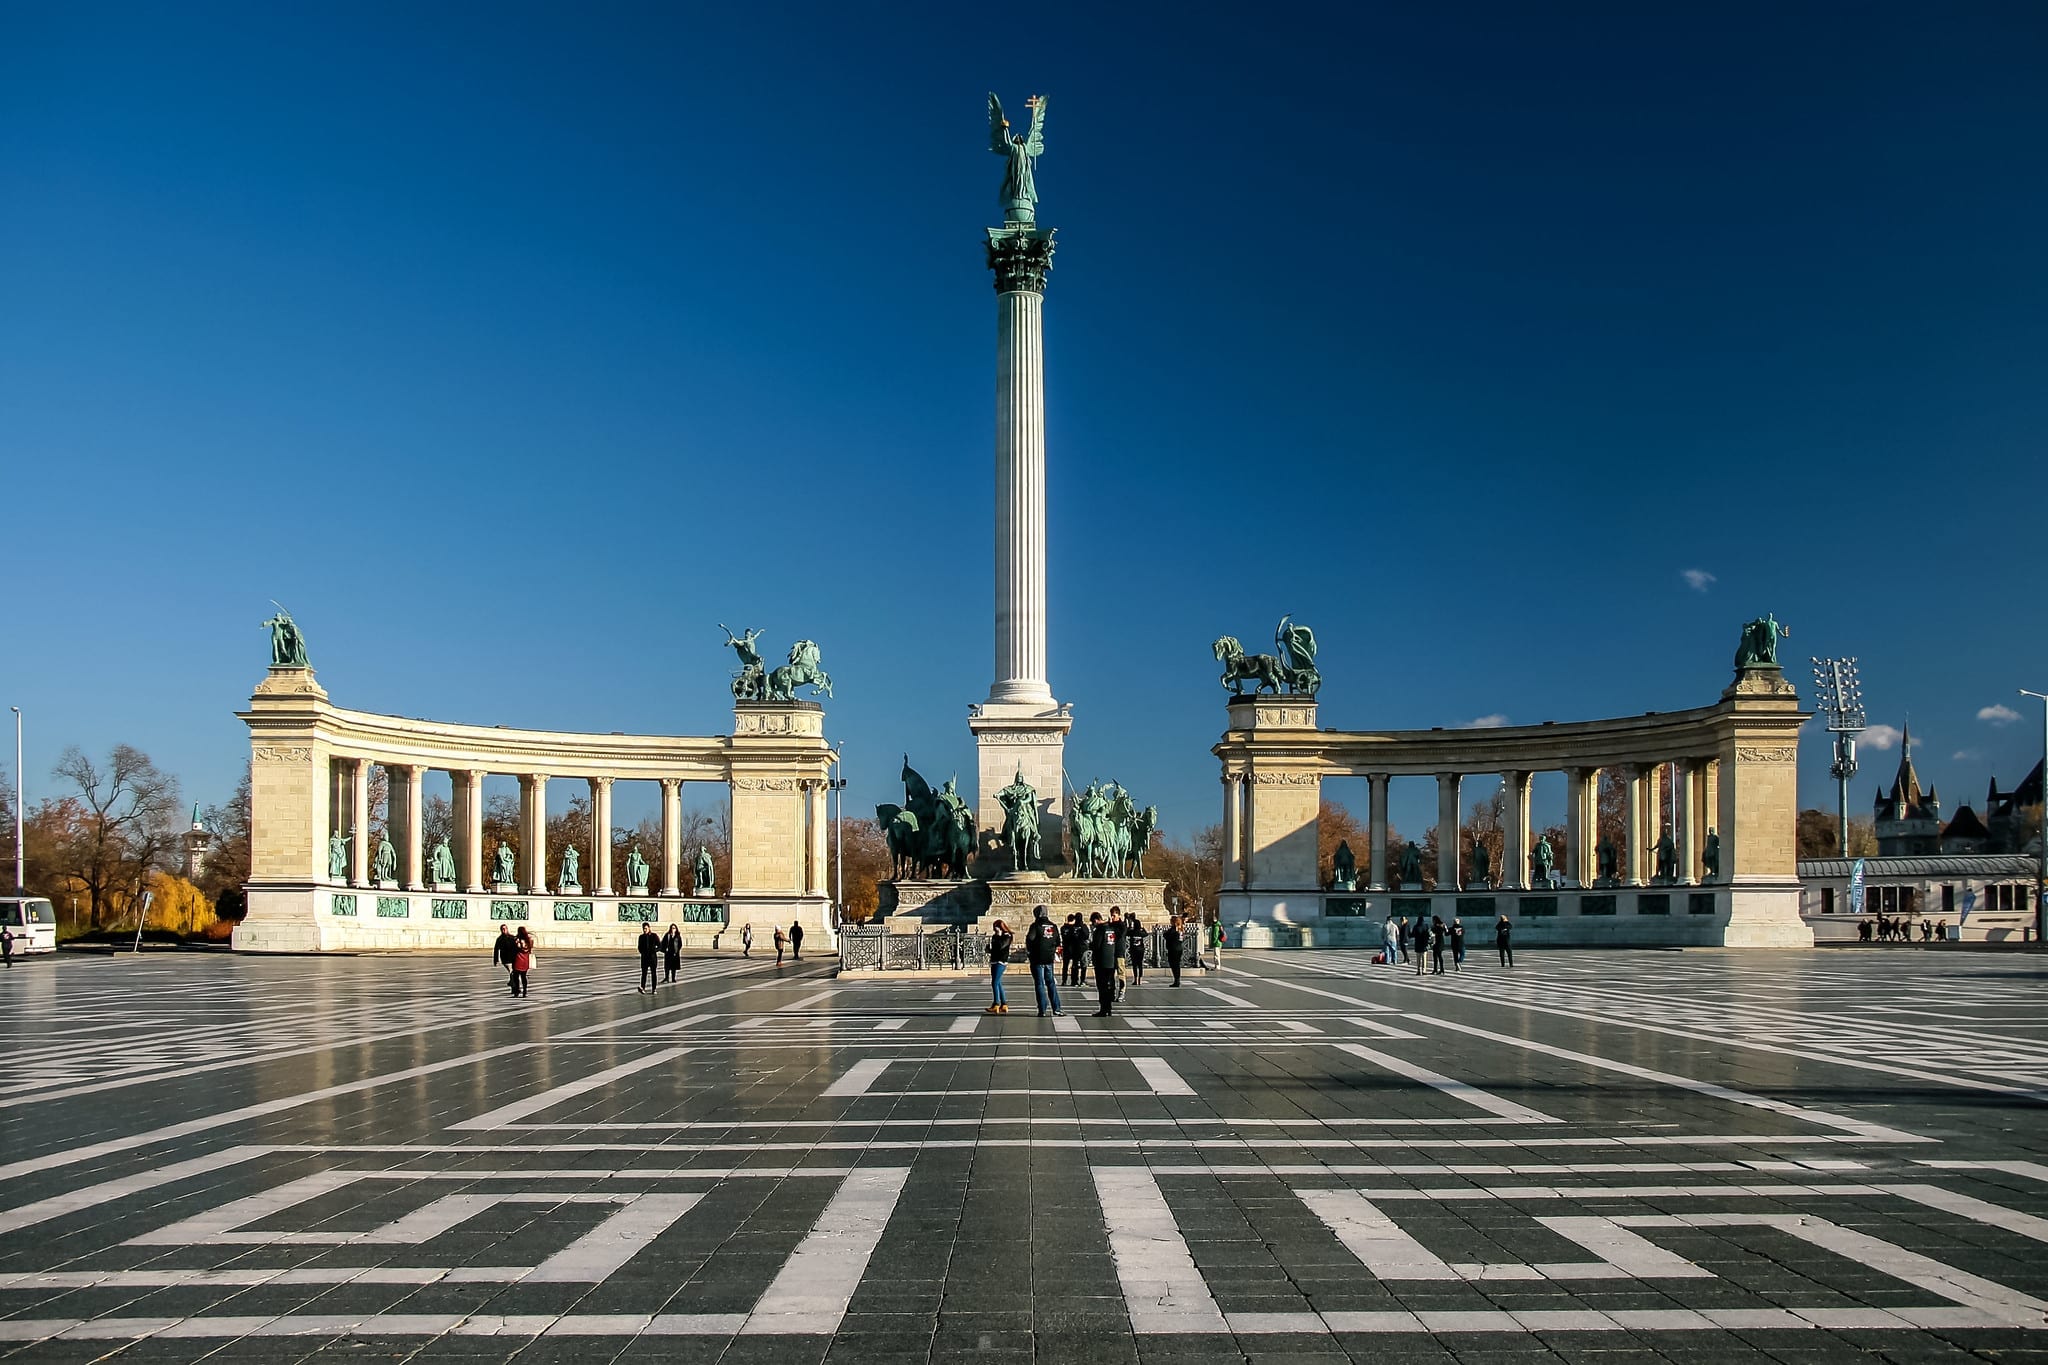 Budapest: Heroes' Square